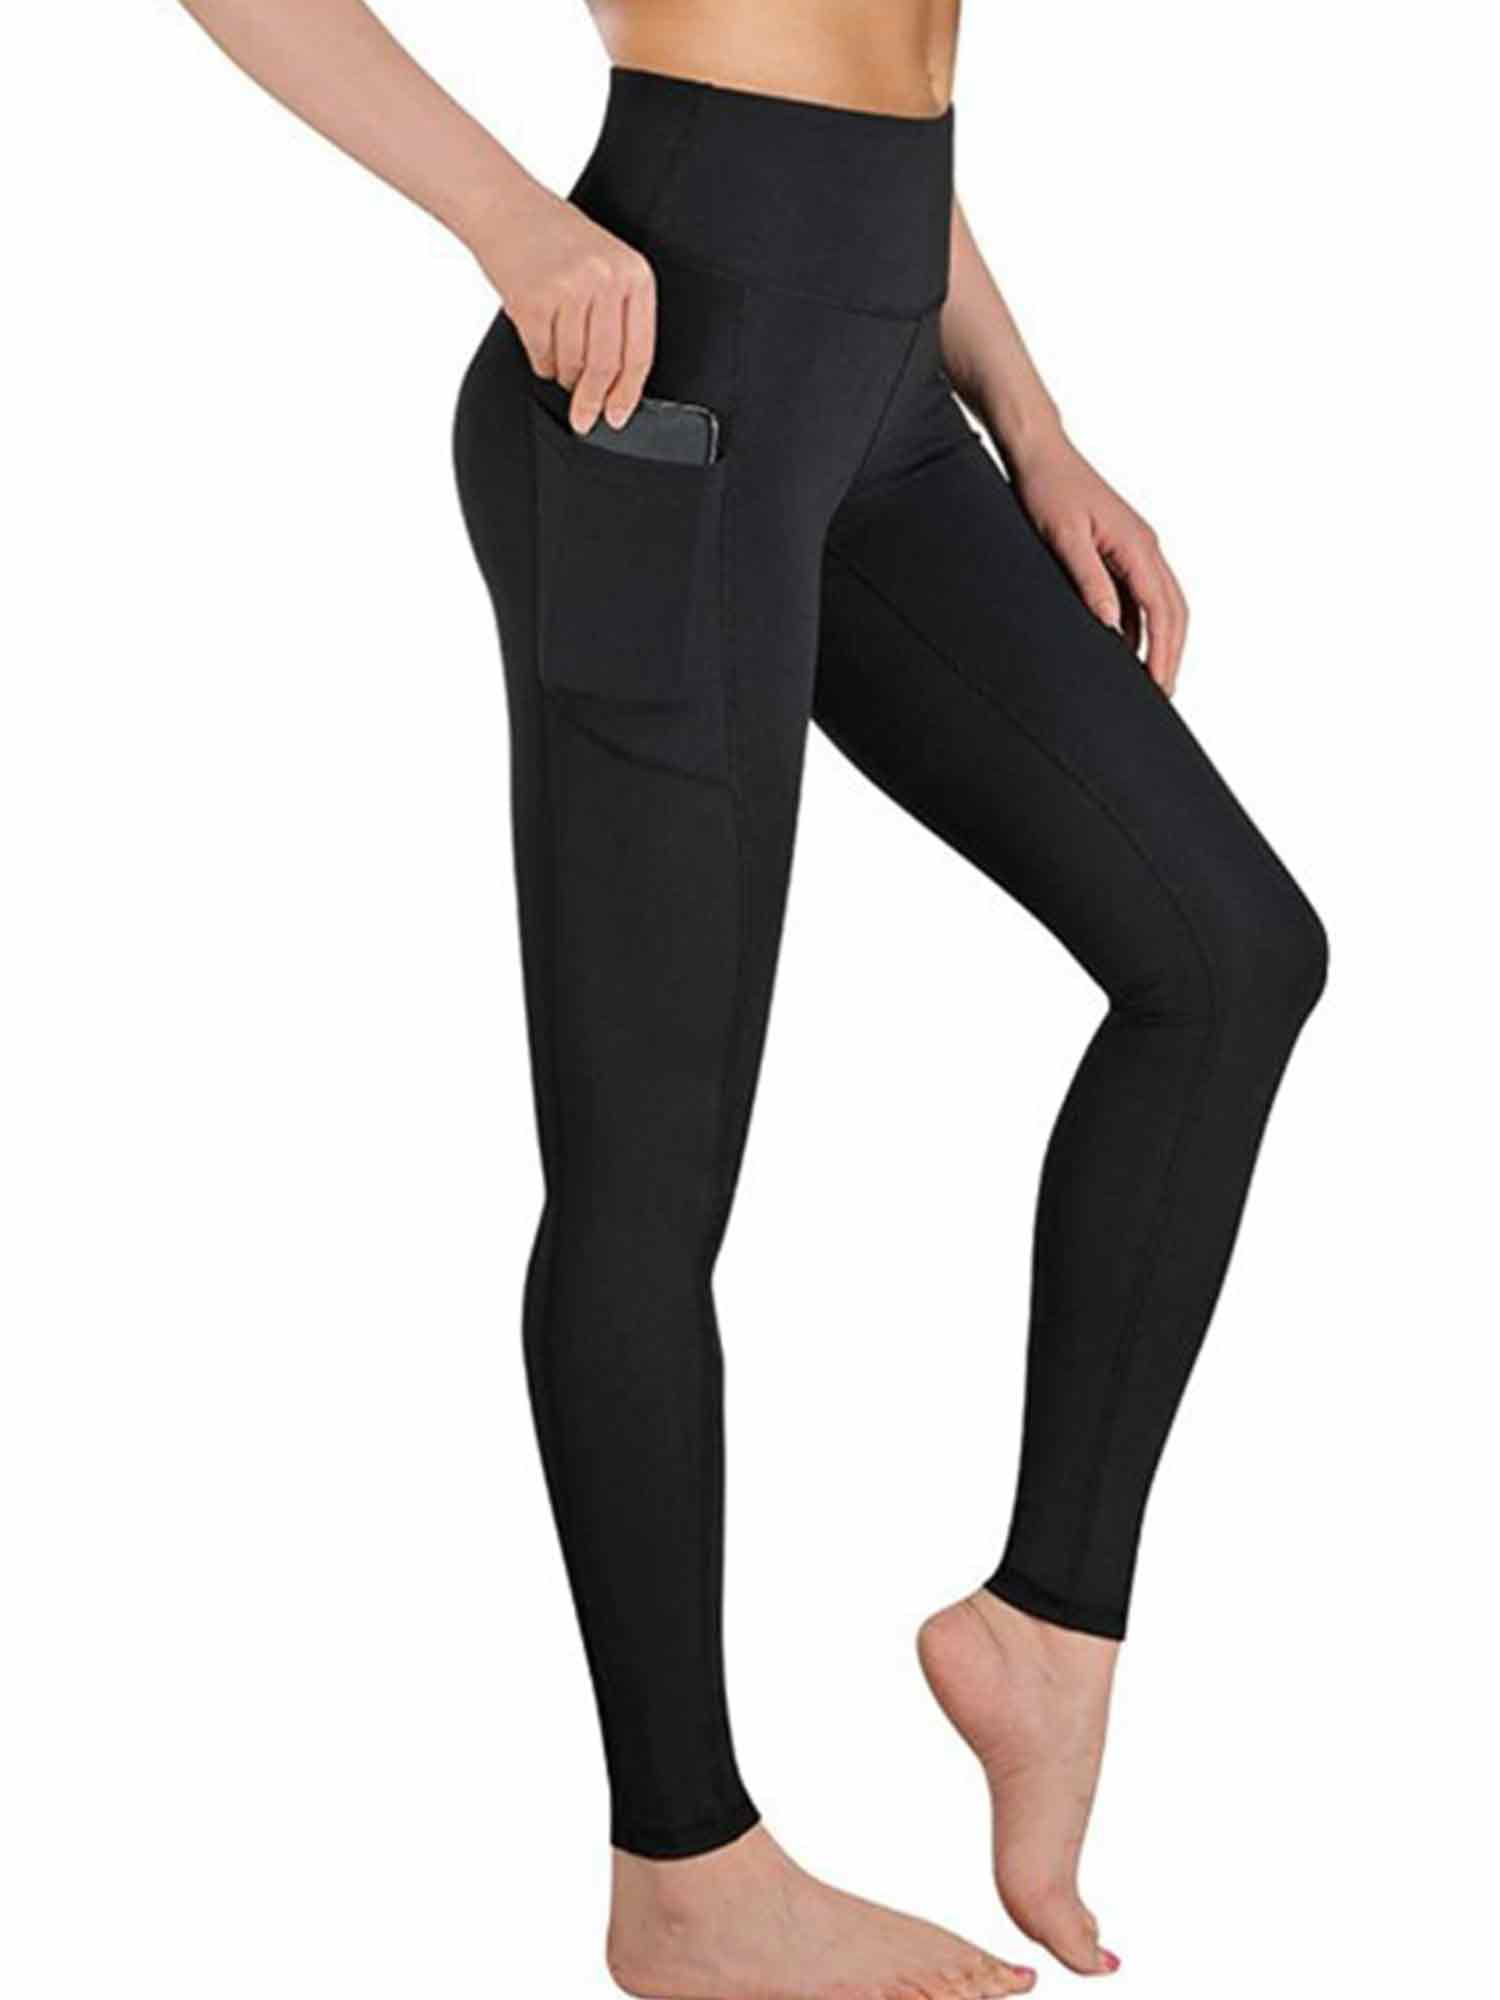 Womens Yoga Pants Fitness Leggings Running Jogging Gym Exercise Sports Trousers 